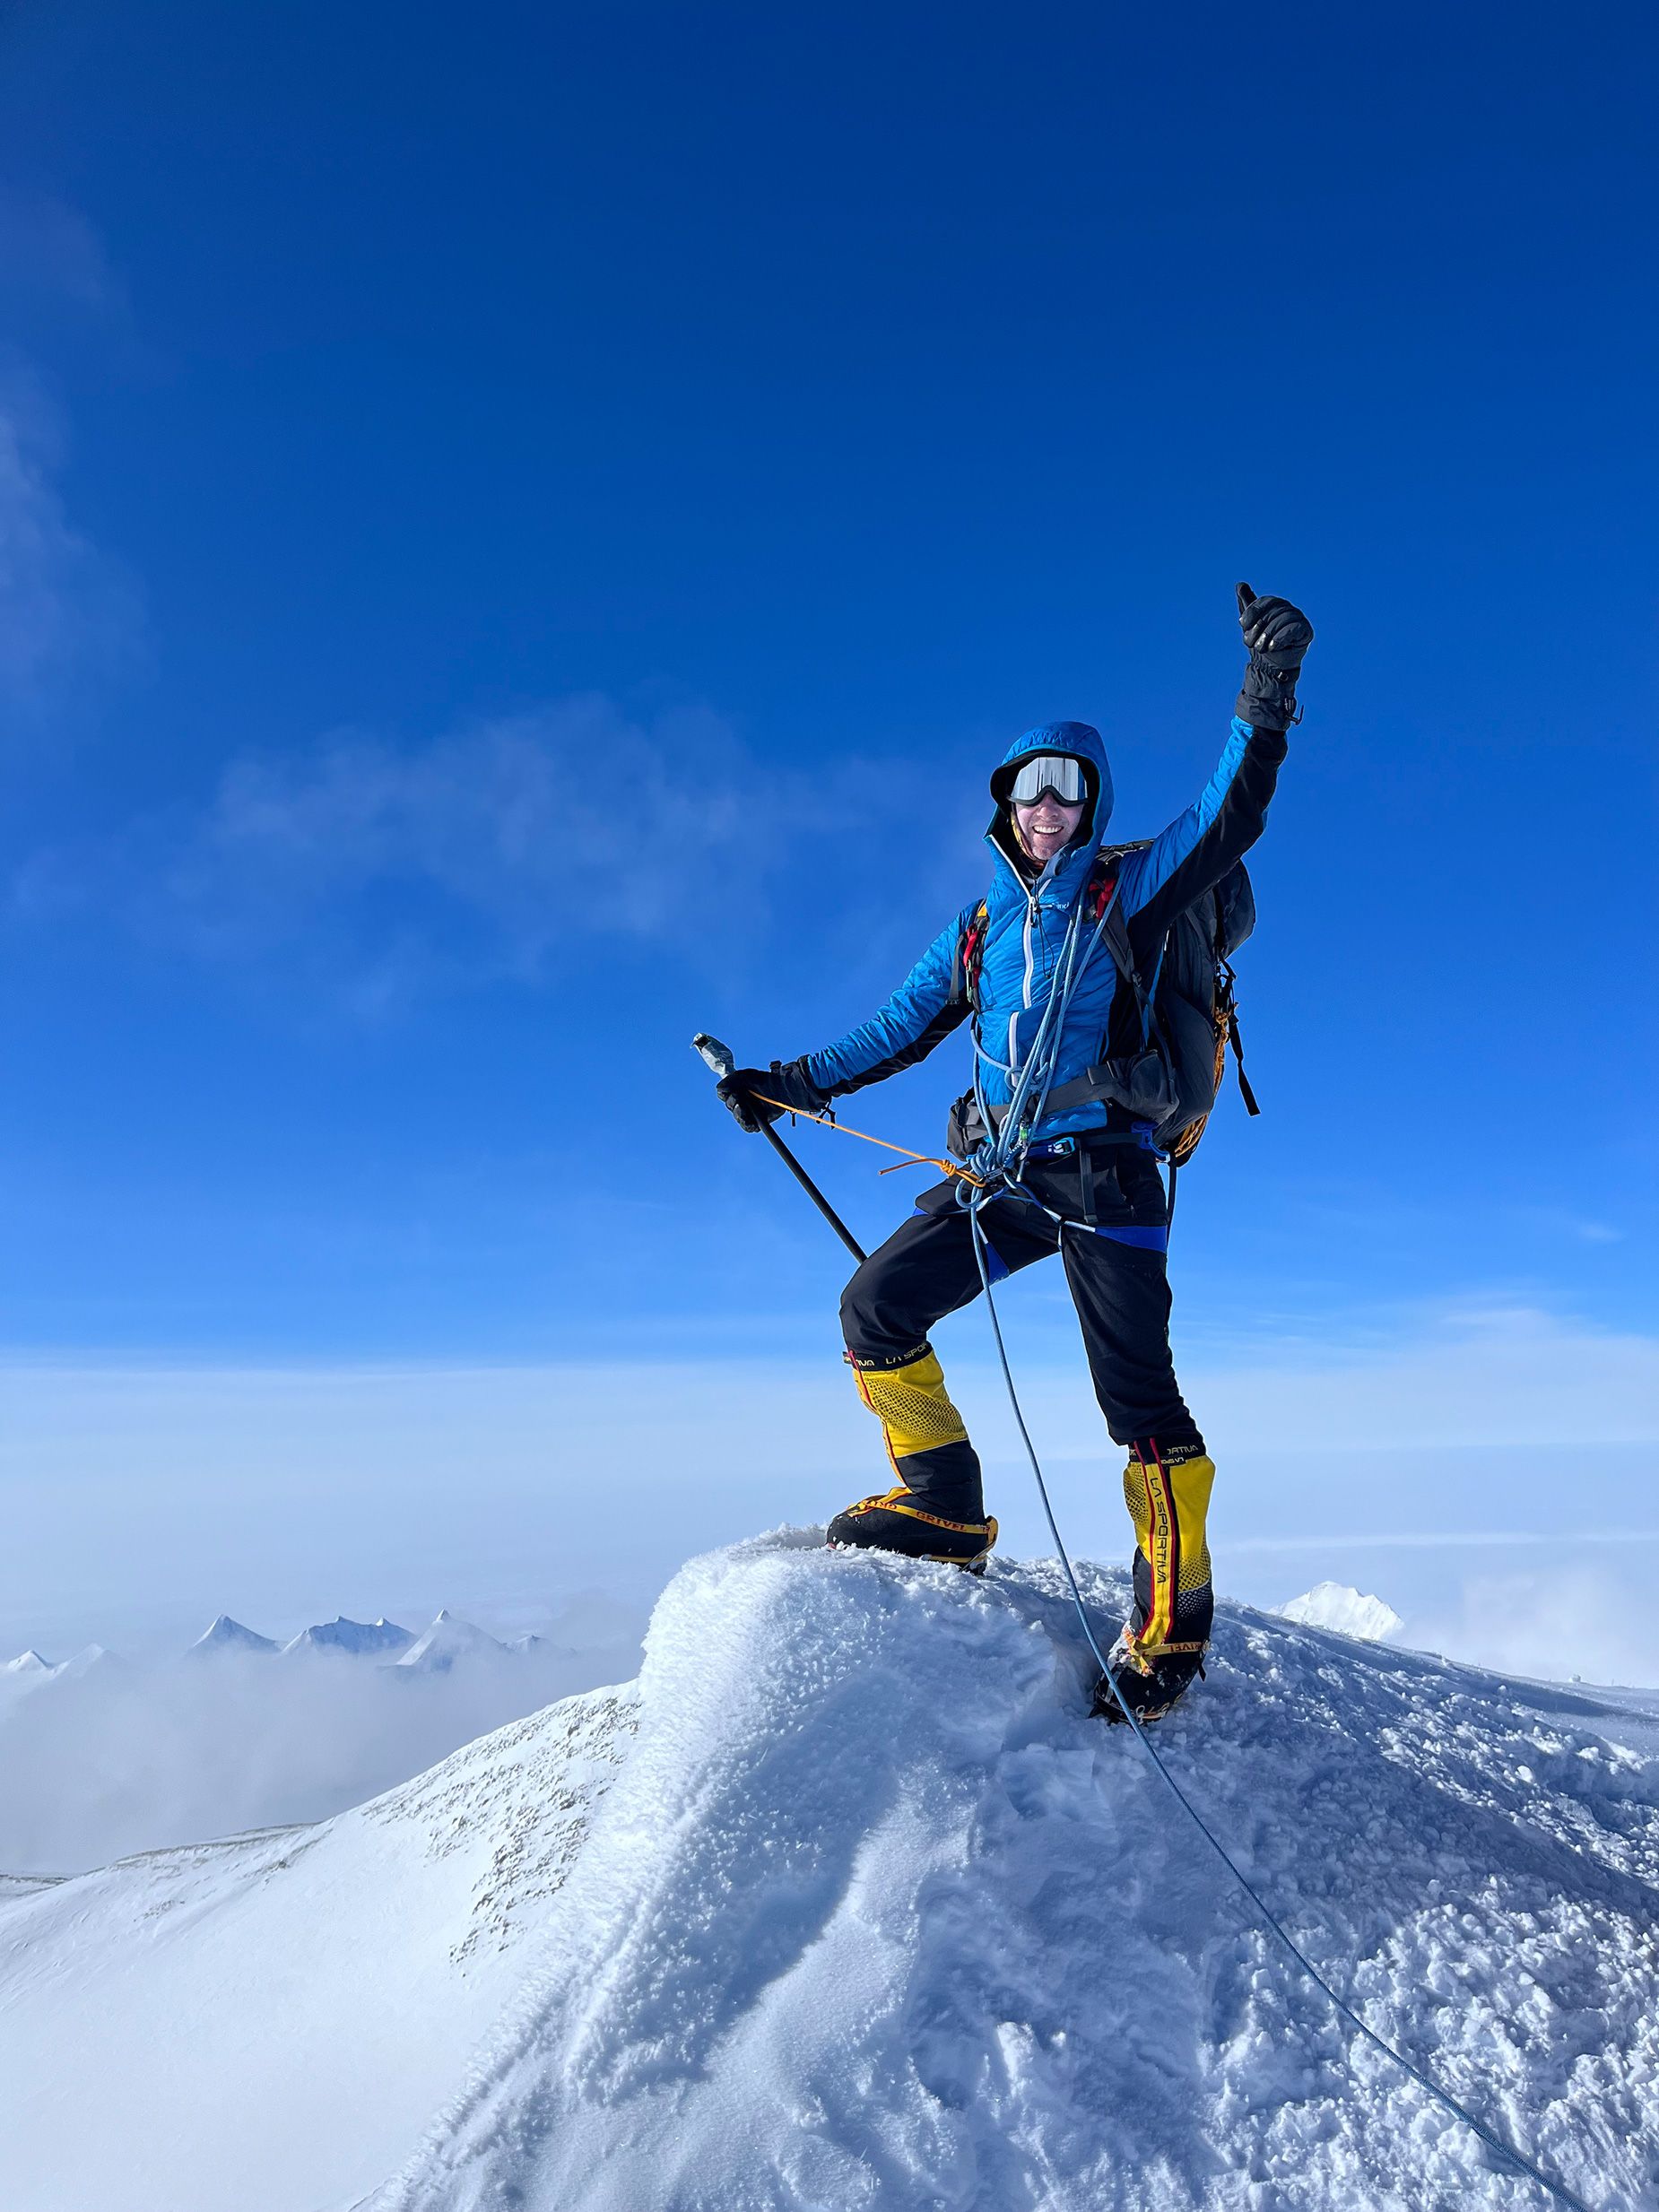 Irish explorer Johnny Ward has climbed the seven summits, reached the North and South poles, and visited every country in the world.